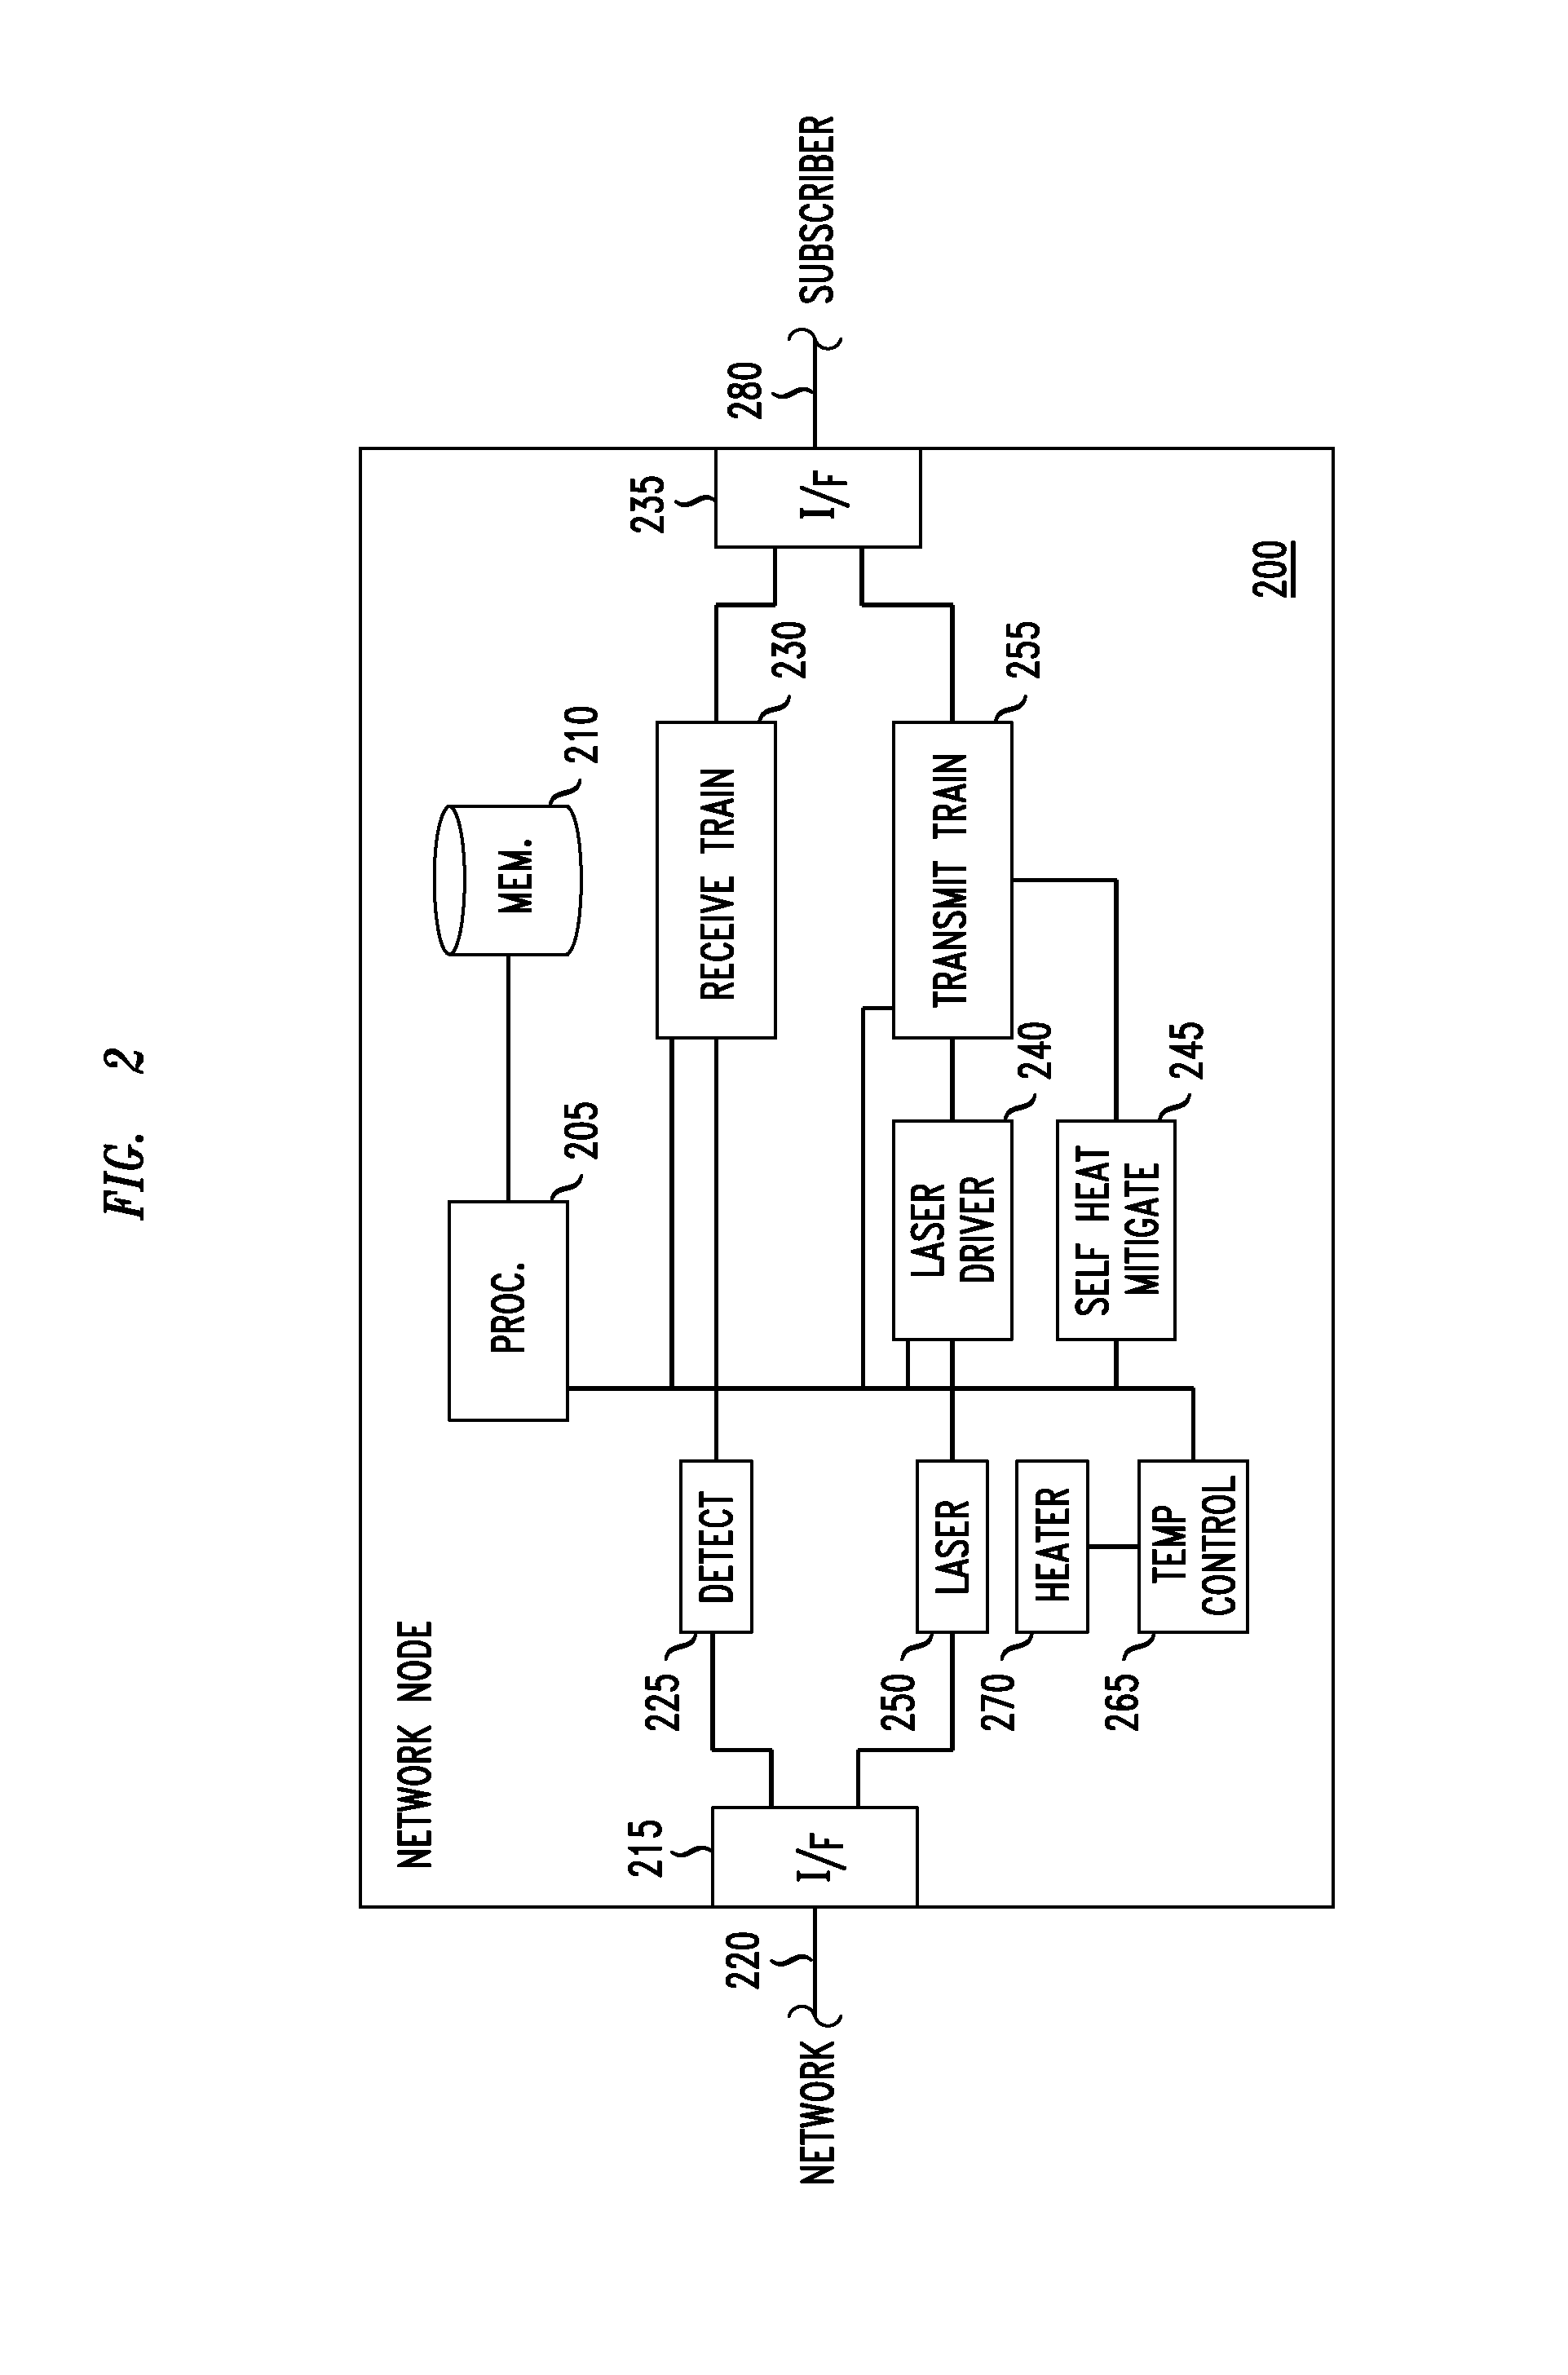 Method And Apparatus For Optical Transmission In A Communication Network